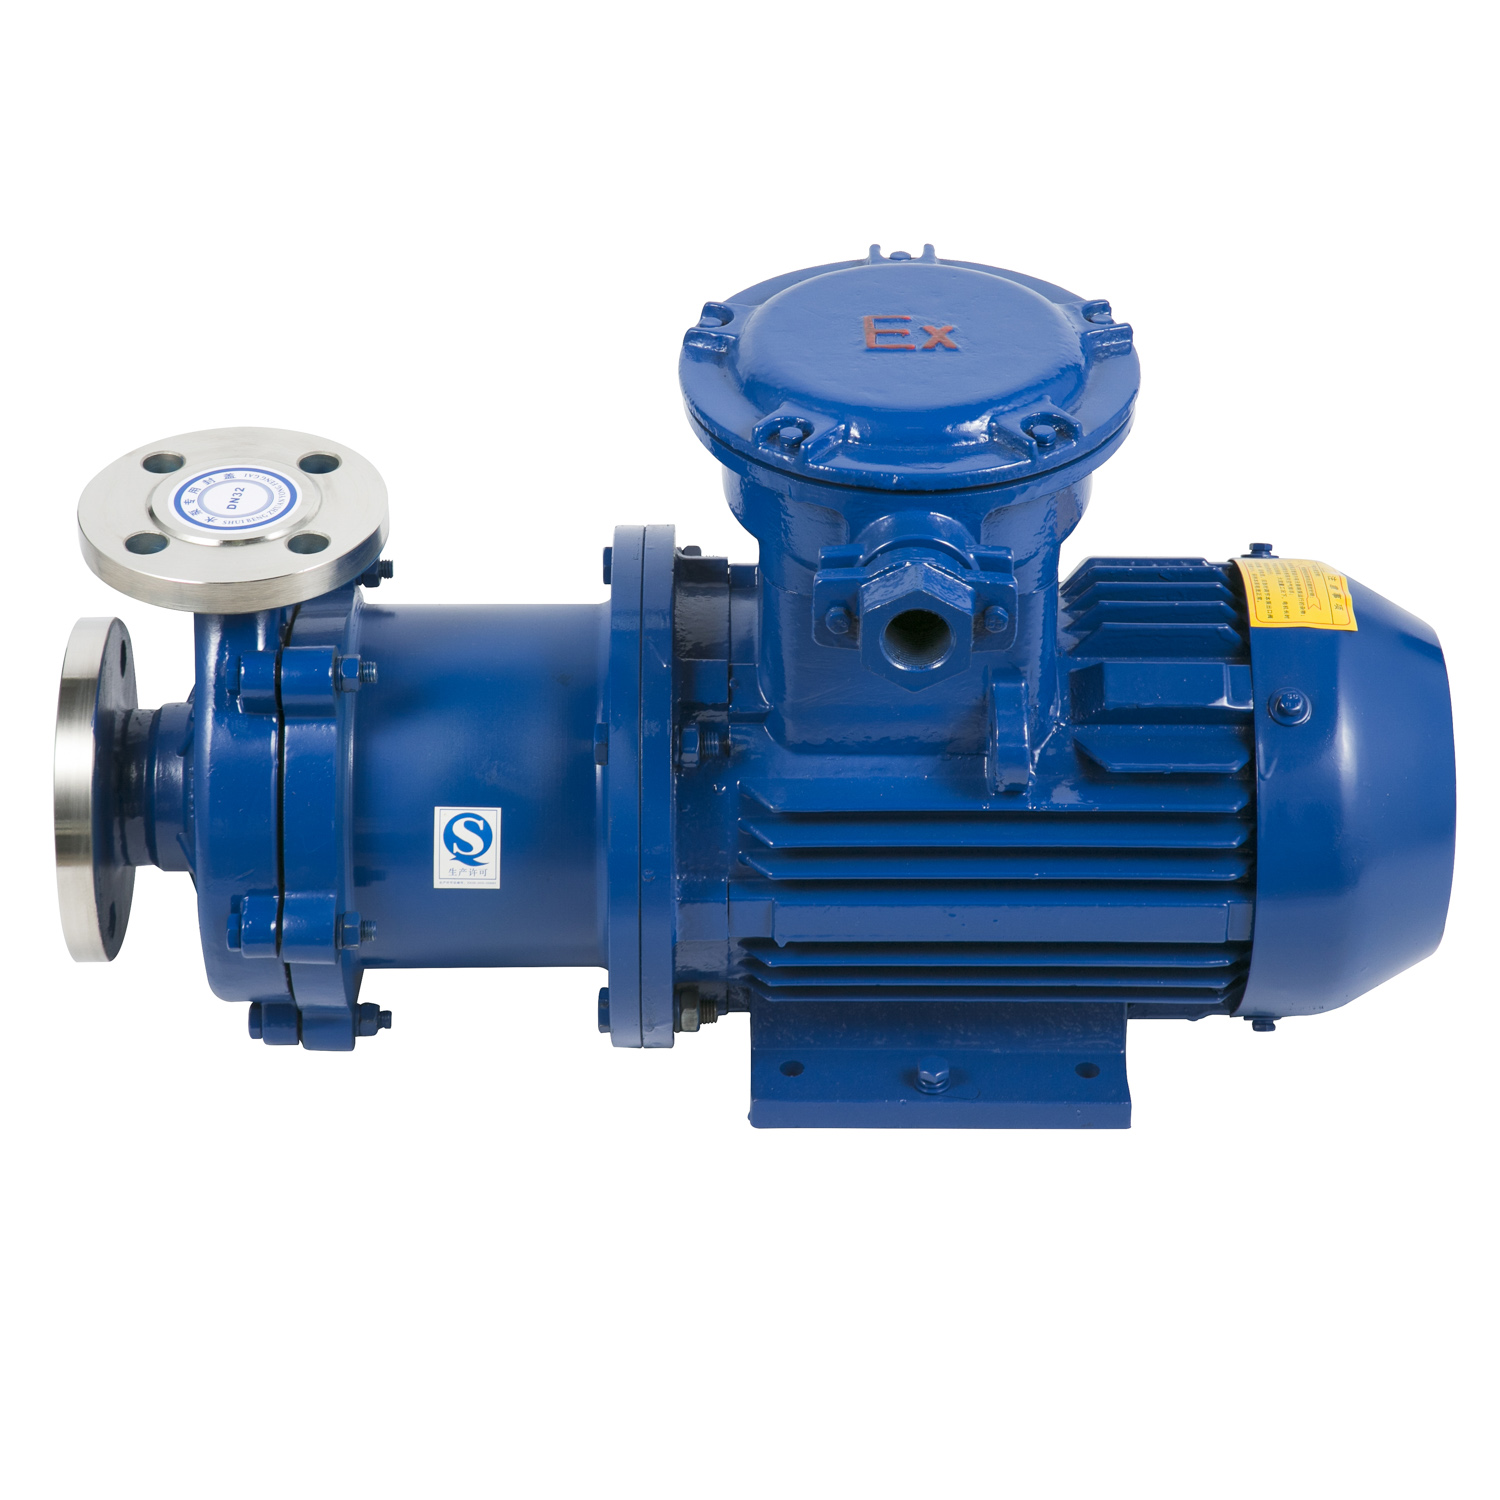 CQ Series No Leakage Seal-less Magnetic Drive Pump